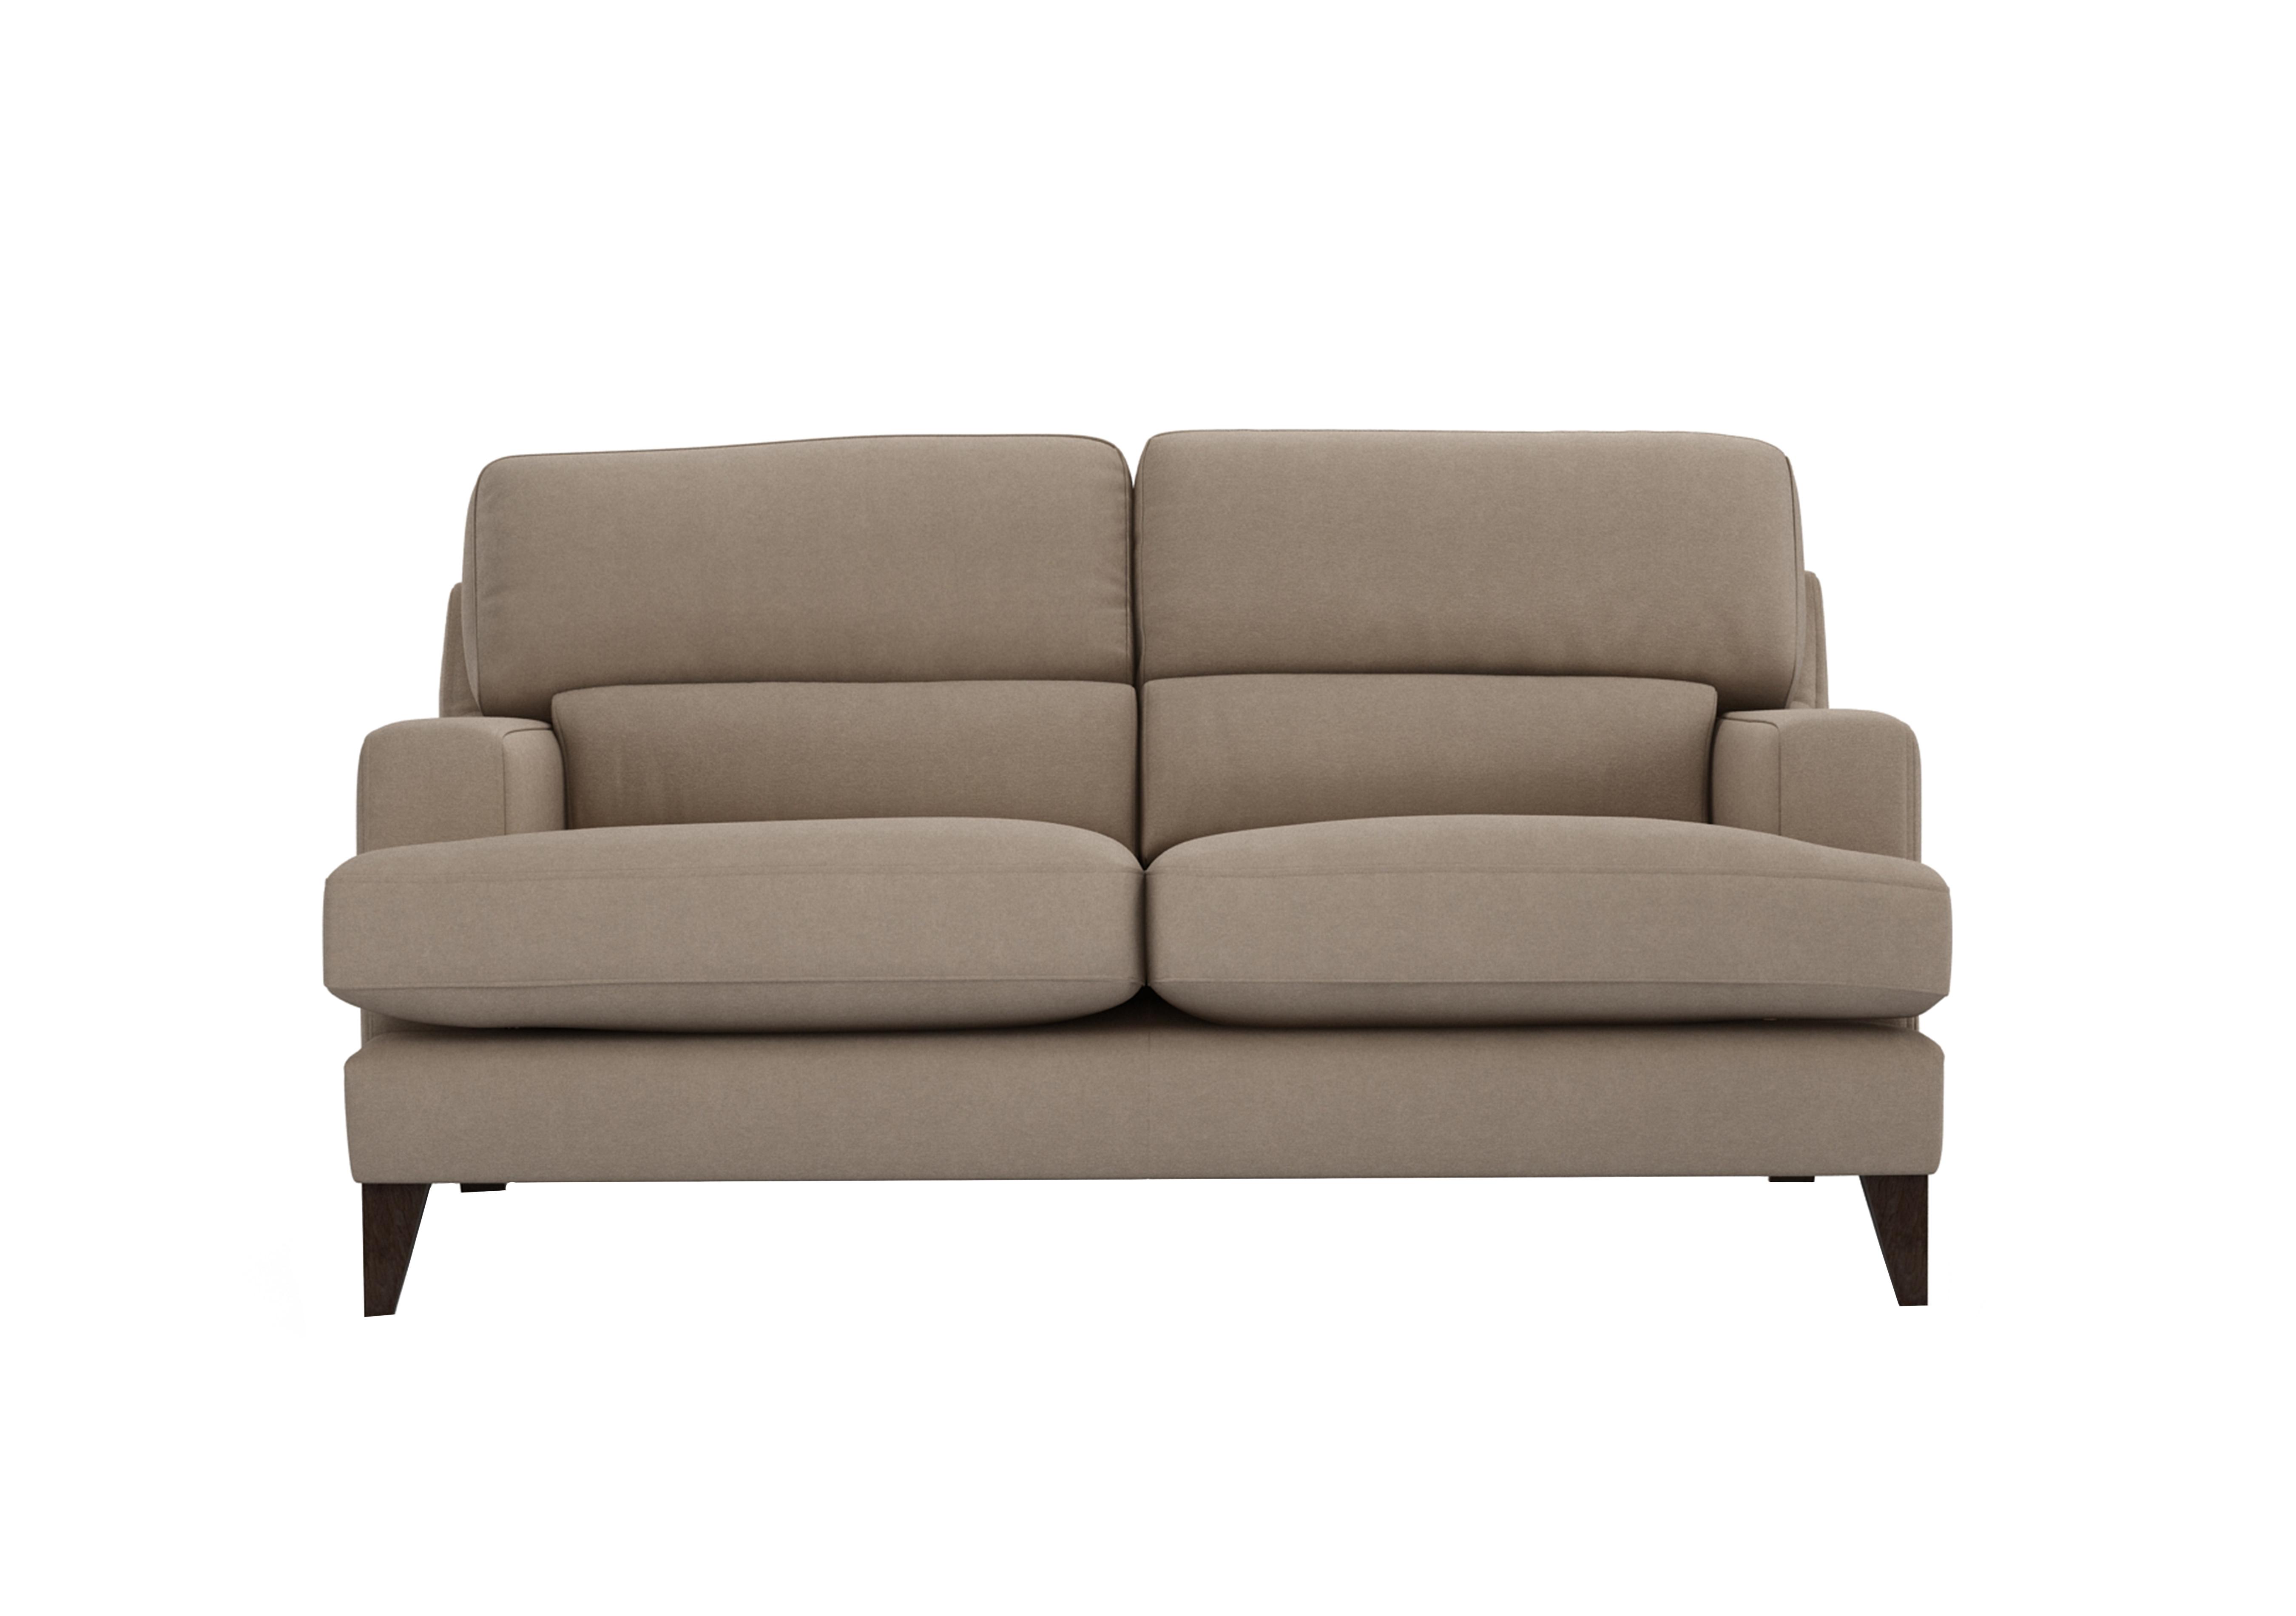 Romilly 2.5 Seater Fabric Sofa in Bra223 Brandy Butter Wa Ft on Furniture Village